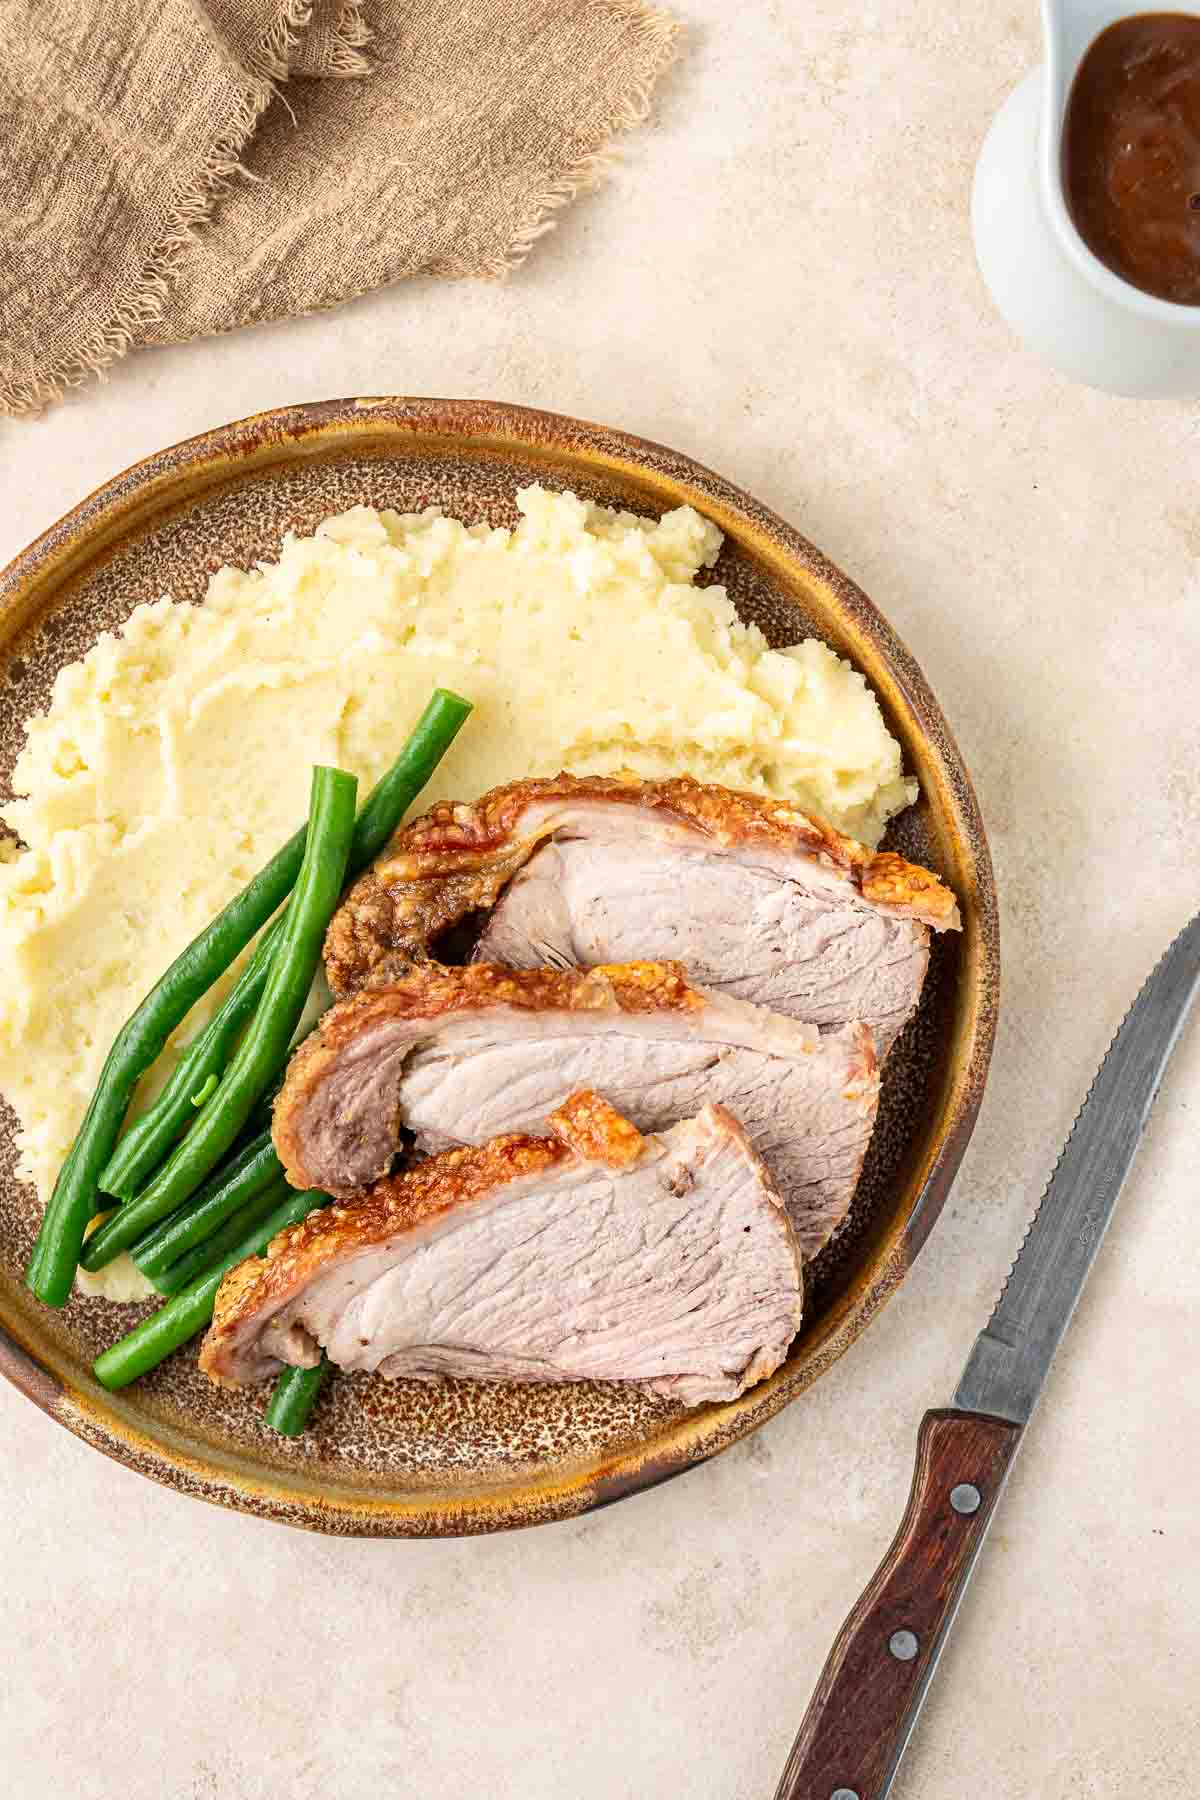 Roast pork slices and crackling over mashed potatoes and green beans.